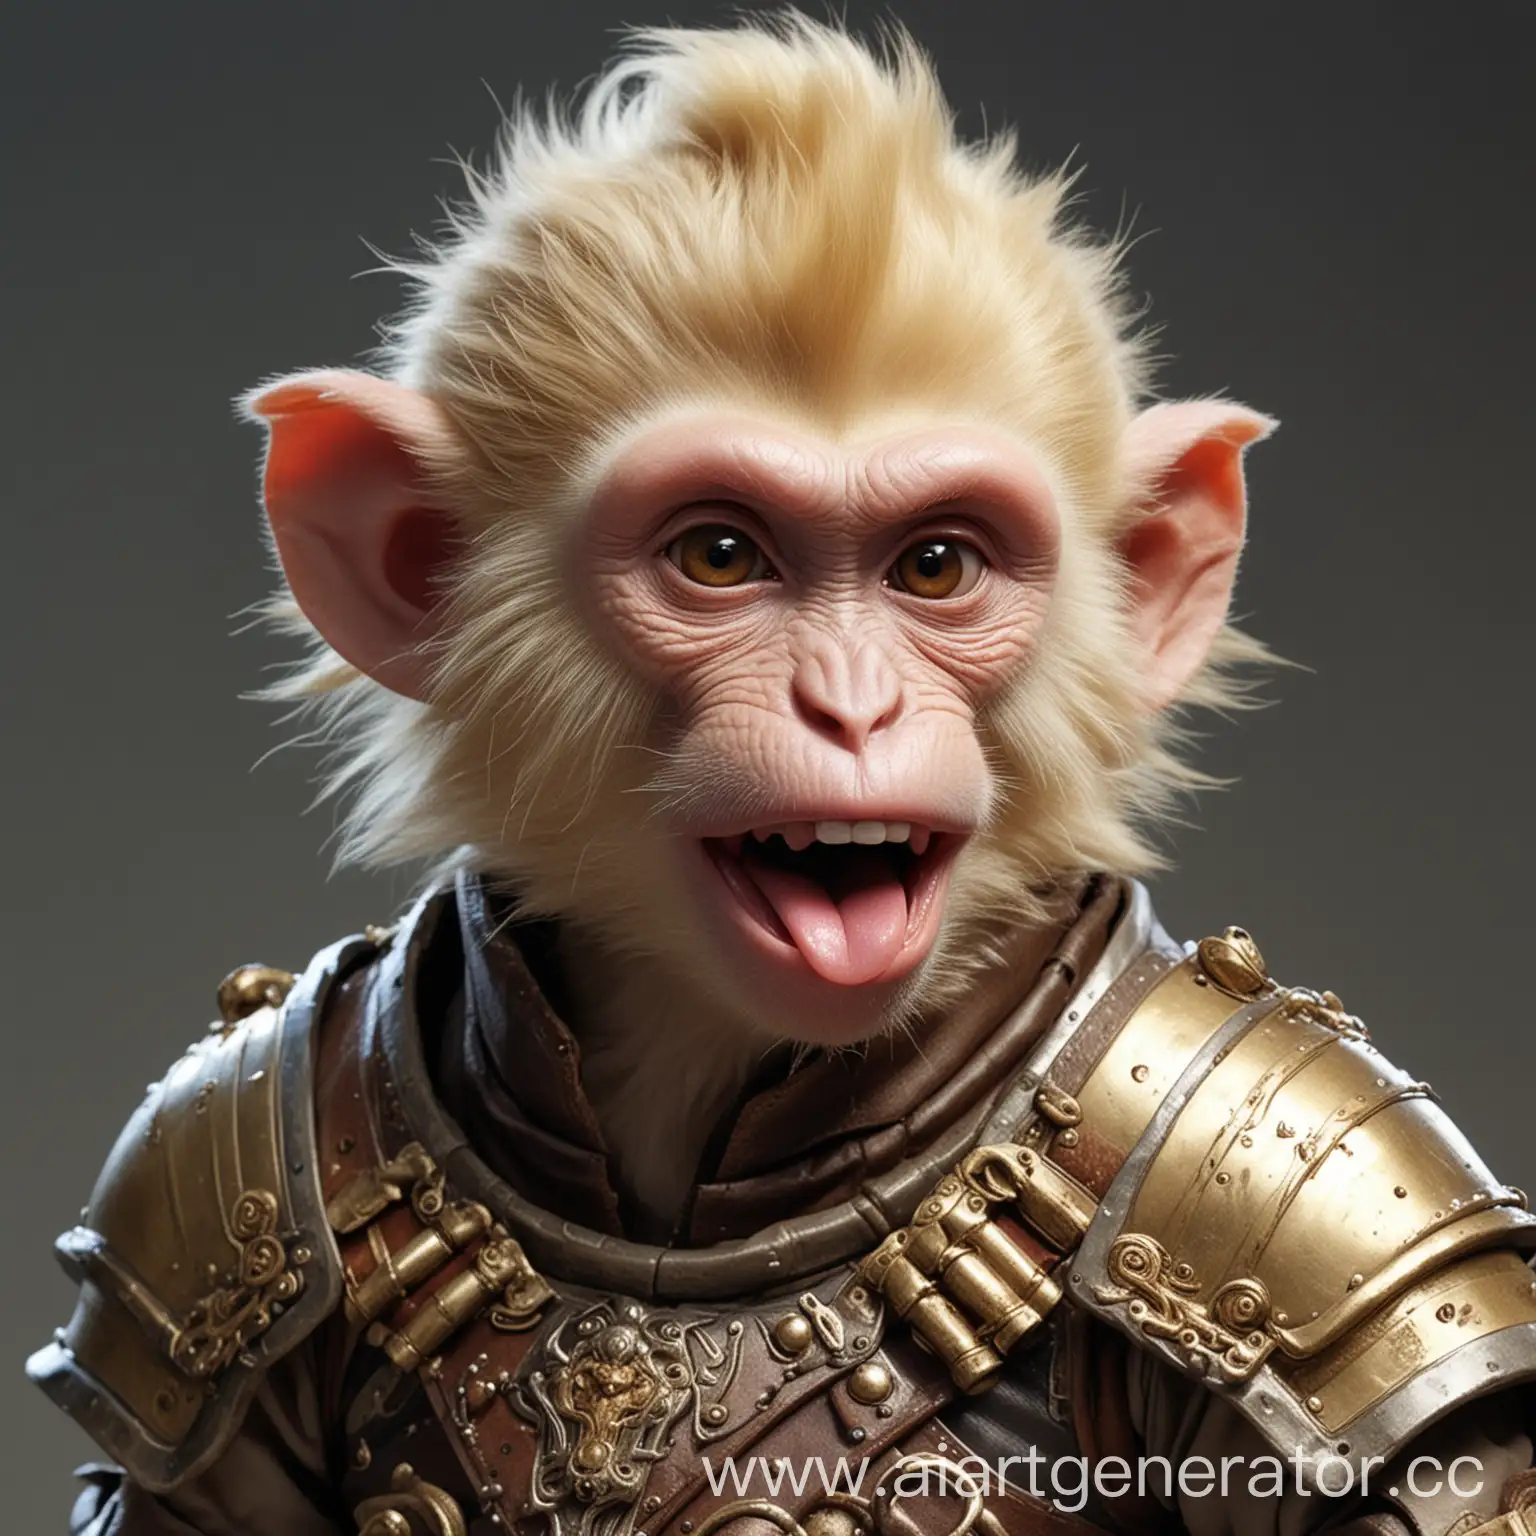 Armored-Blonde-Monkey-Monk-with-Nimble-Tongue-and-Humongous-Slobbering-Tongue